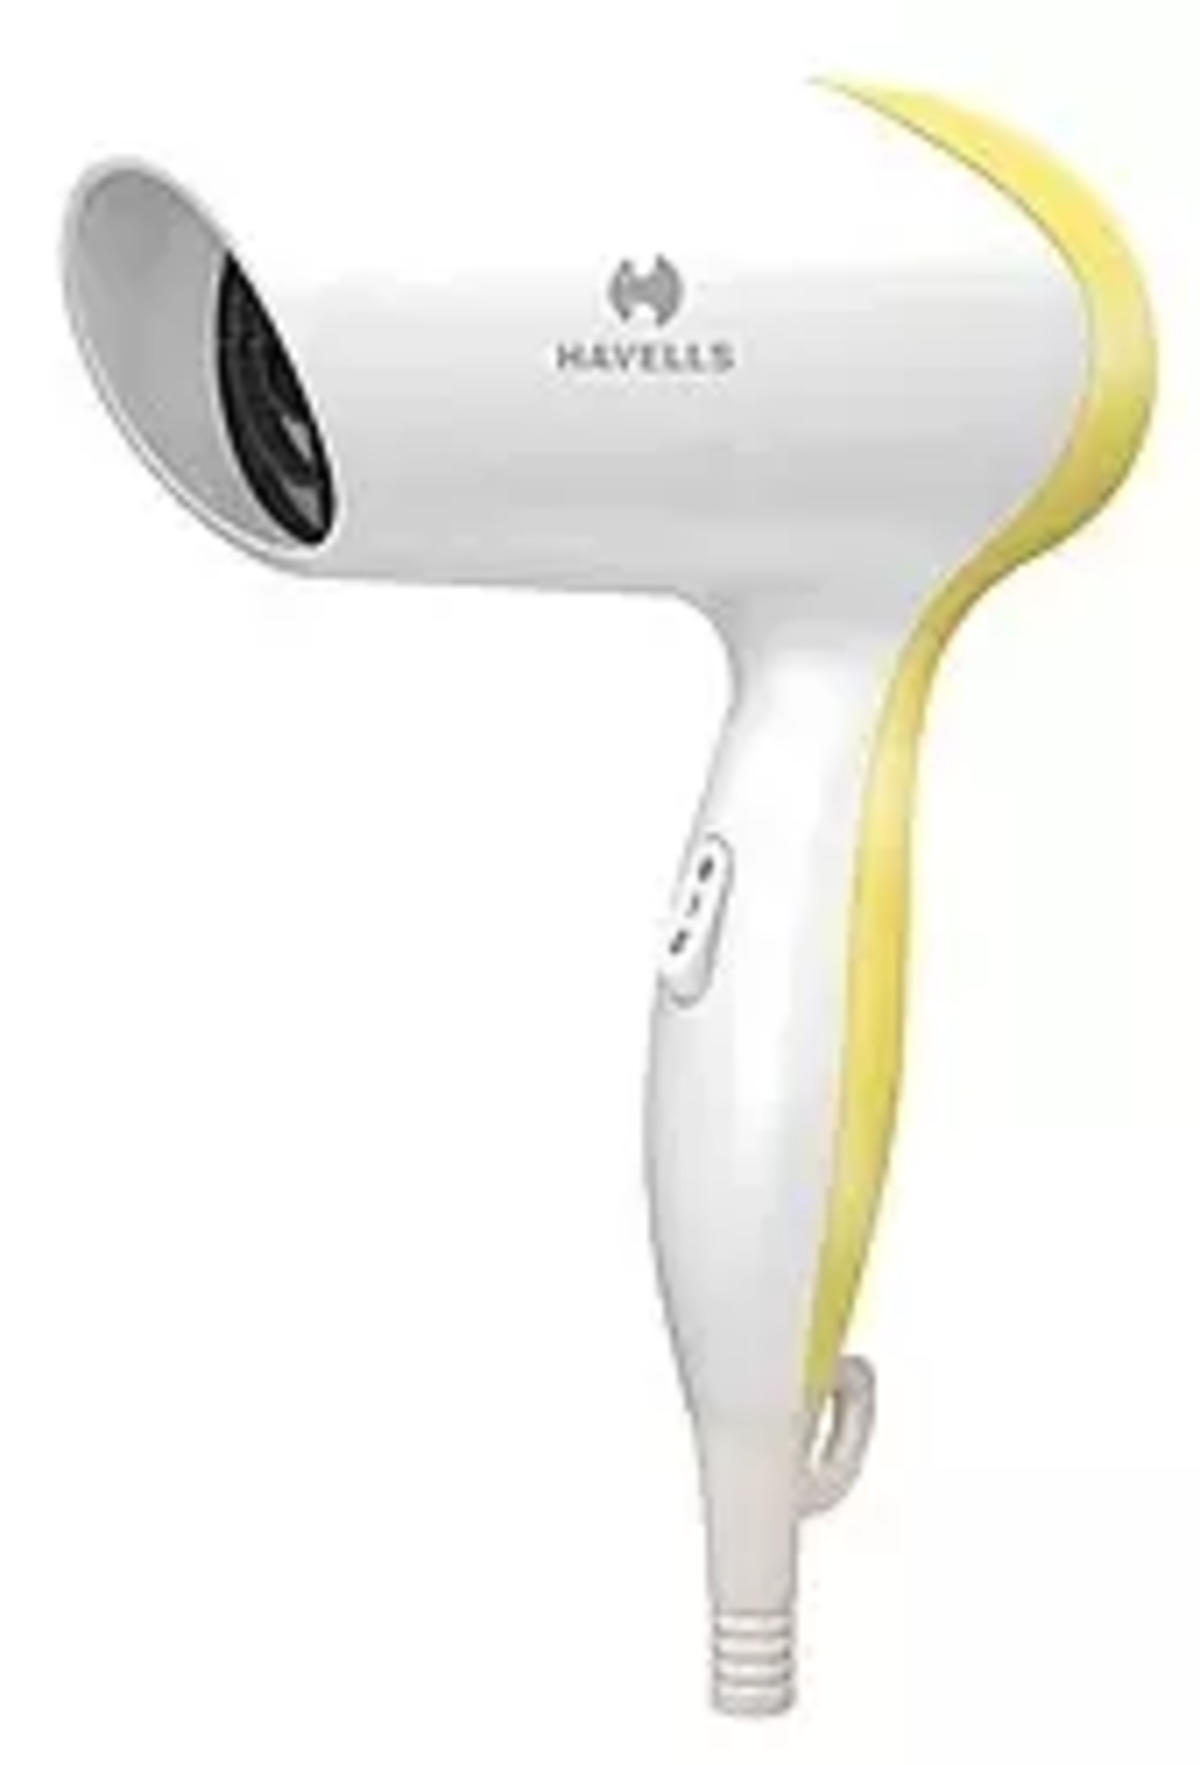 Havells Wave Hair Dryer (White) Price in India, Specifications and Review